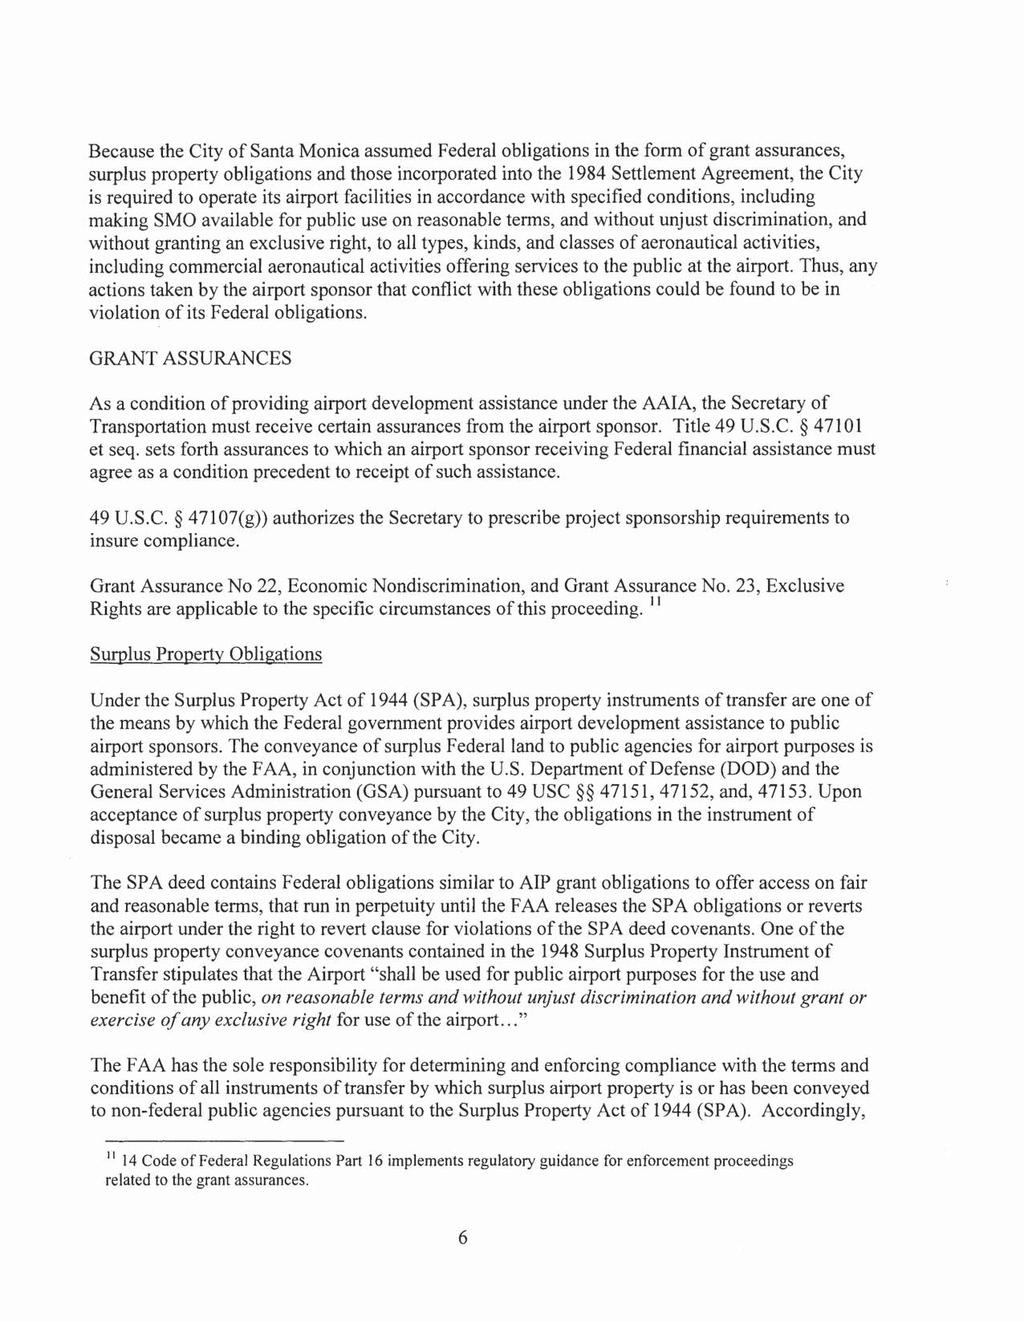 Case 2:13-cv-08046-JFW-VBK Document 21-4 Filed 01/17/14 Page 7 of 10 Page ID #:440 Because the City of Santa Monica assumed Federal obligations in the form of grant assurances, surplus property